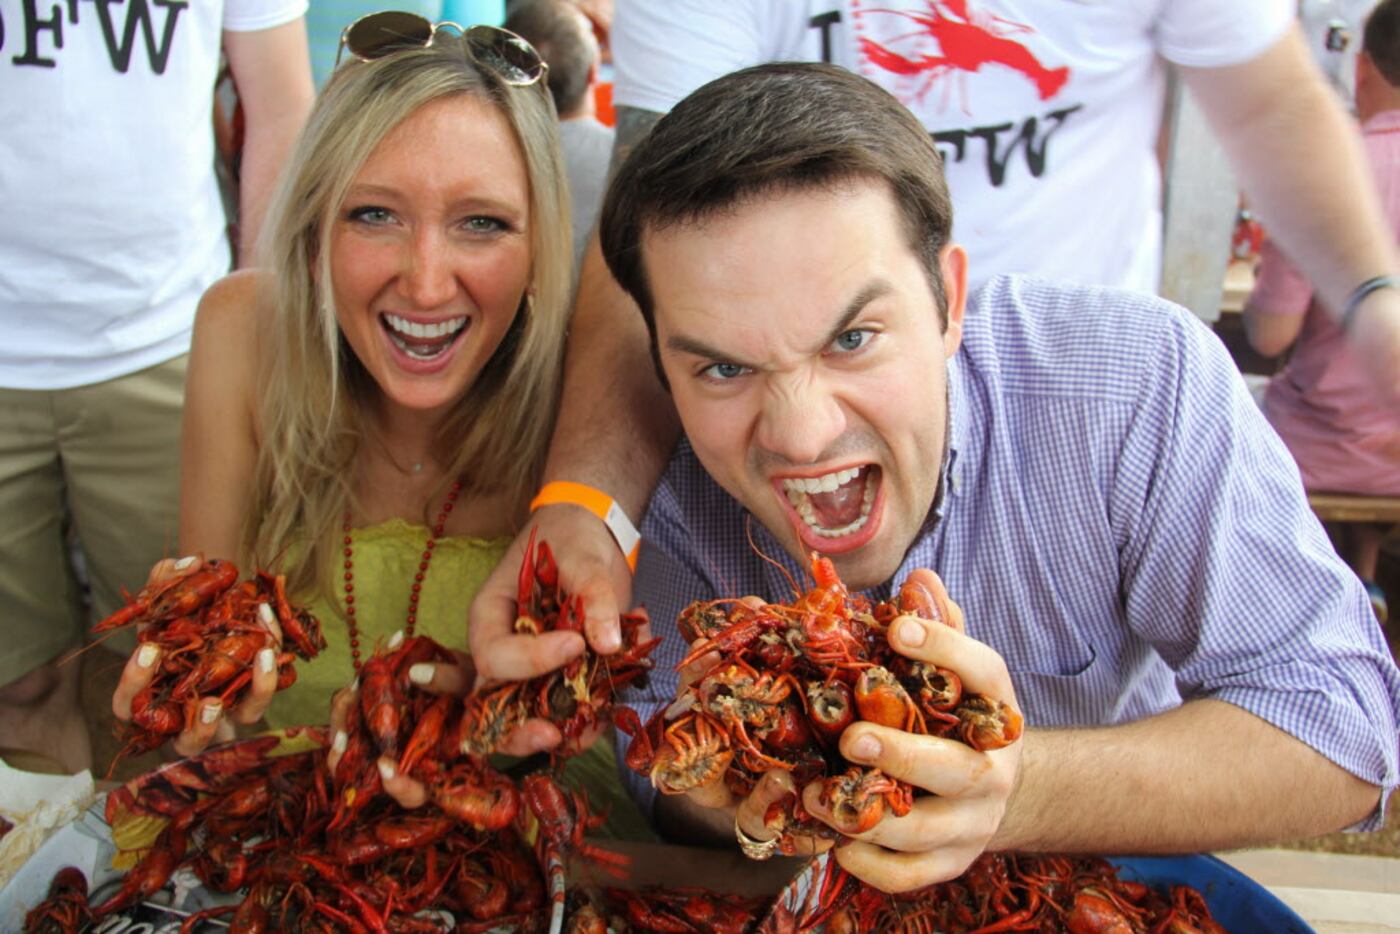 Party pics: Crawfish and patio fun at the Rustic for Boil for the